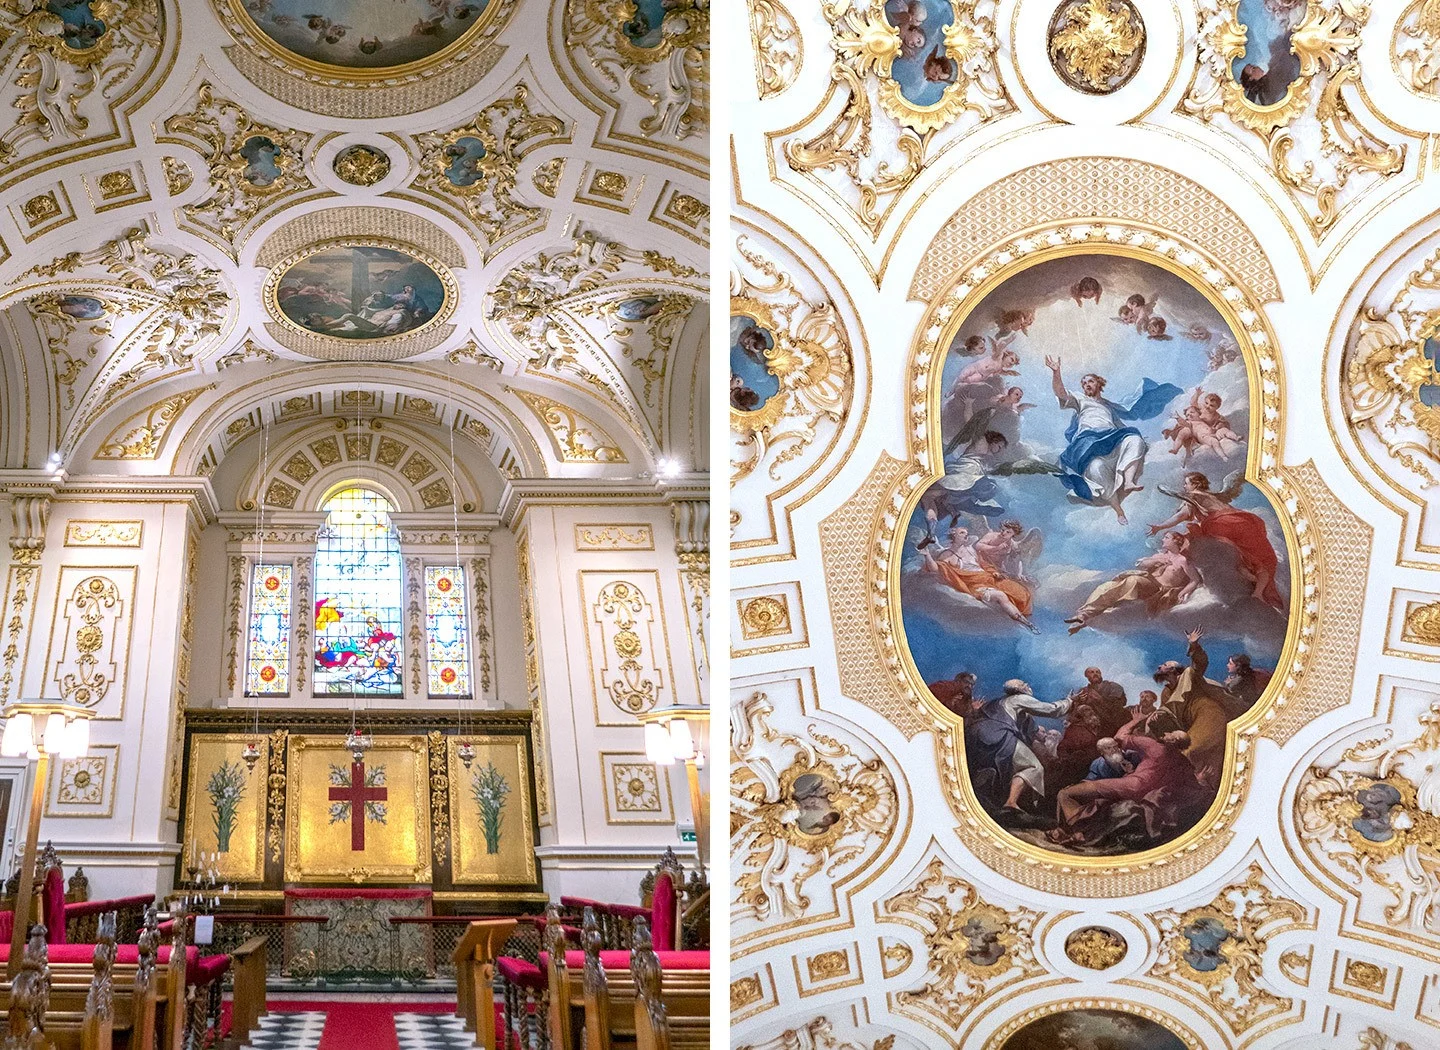 The Baroque interiors of Great Witley Church